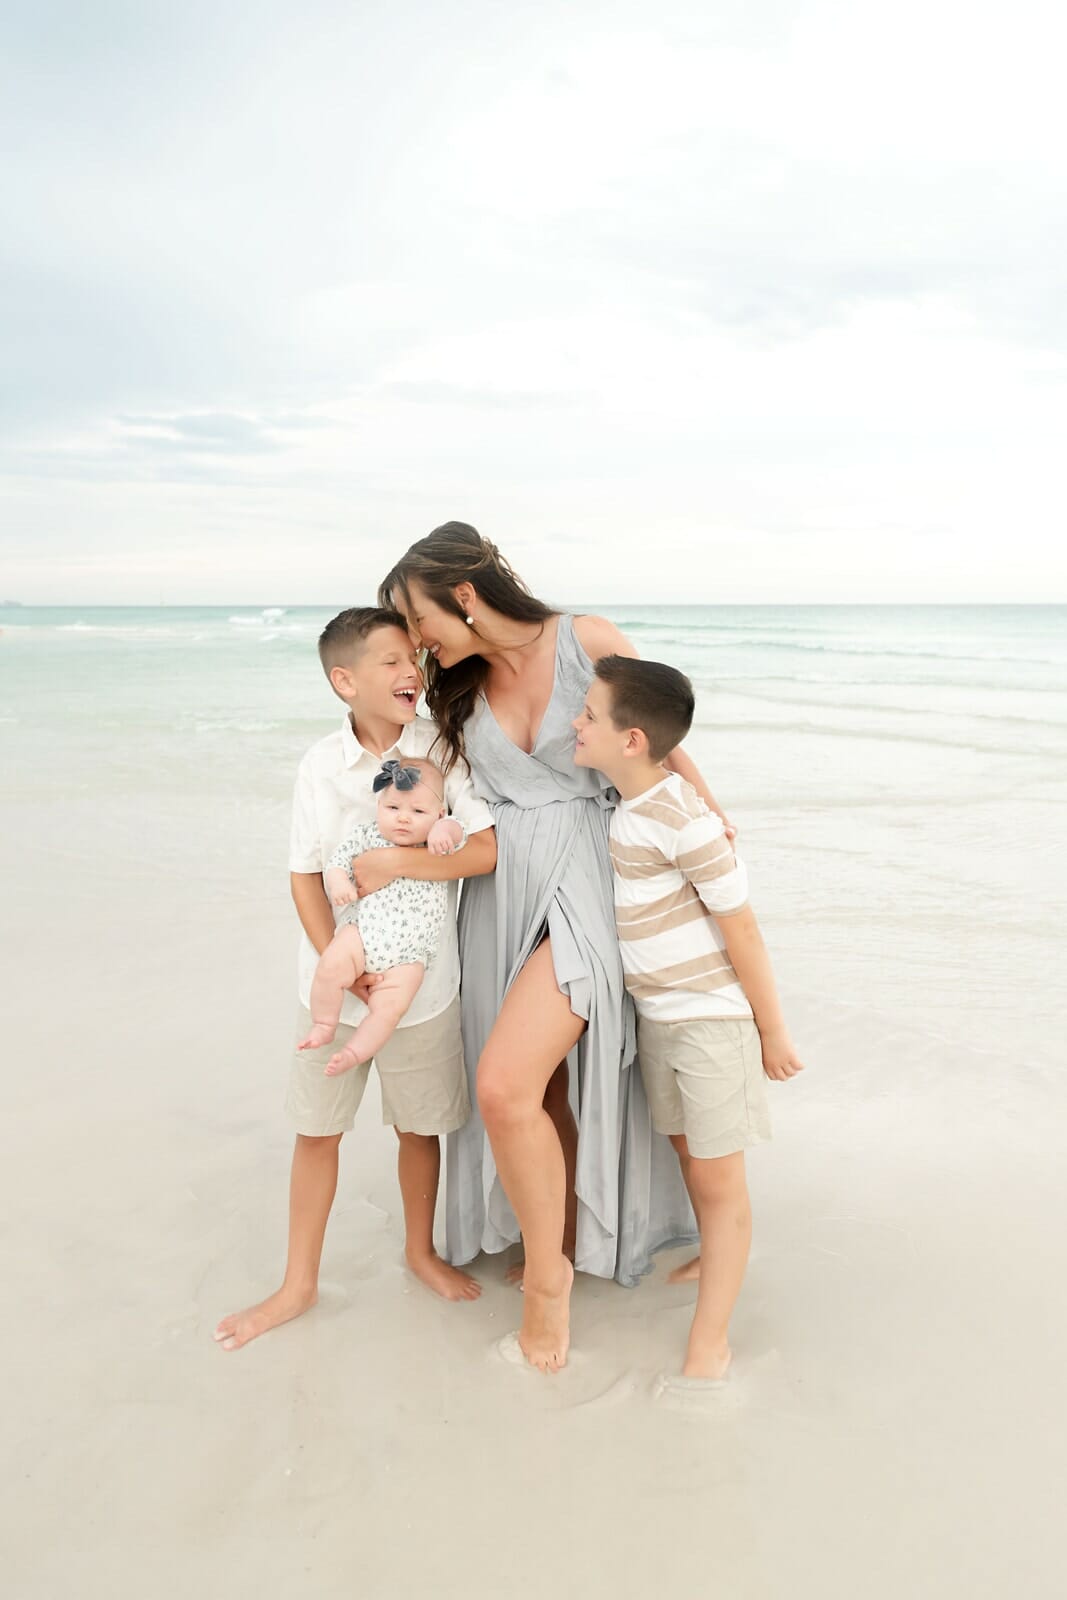 A family poses on the beach with their children.